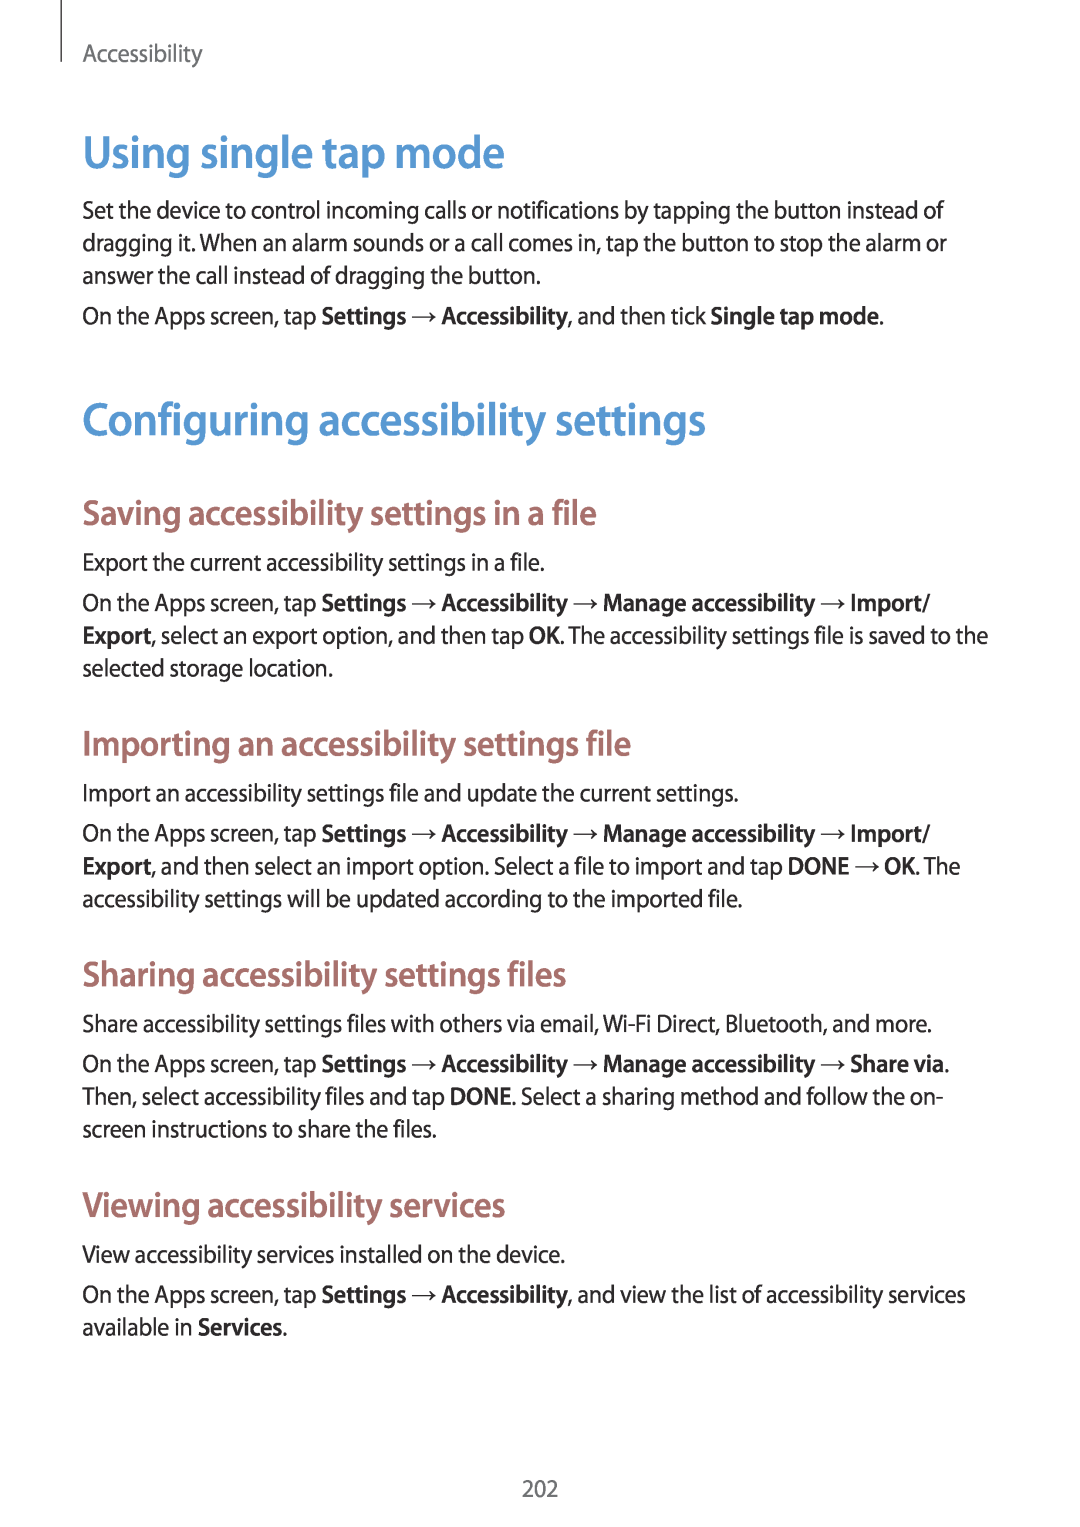 Samsung SM-G901FZWADTM Using single tap mode, Configuring accessibility settings, Saving accessibility settings in a file 